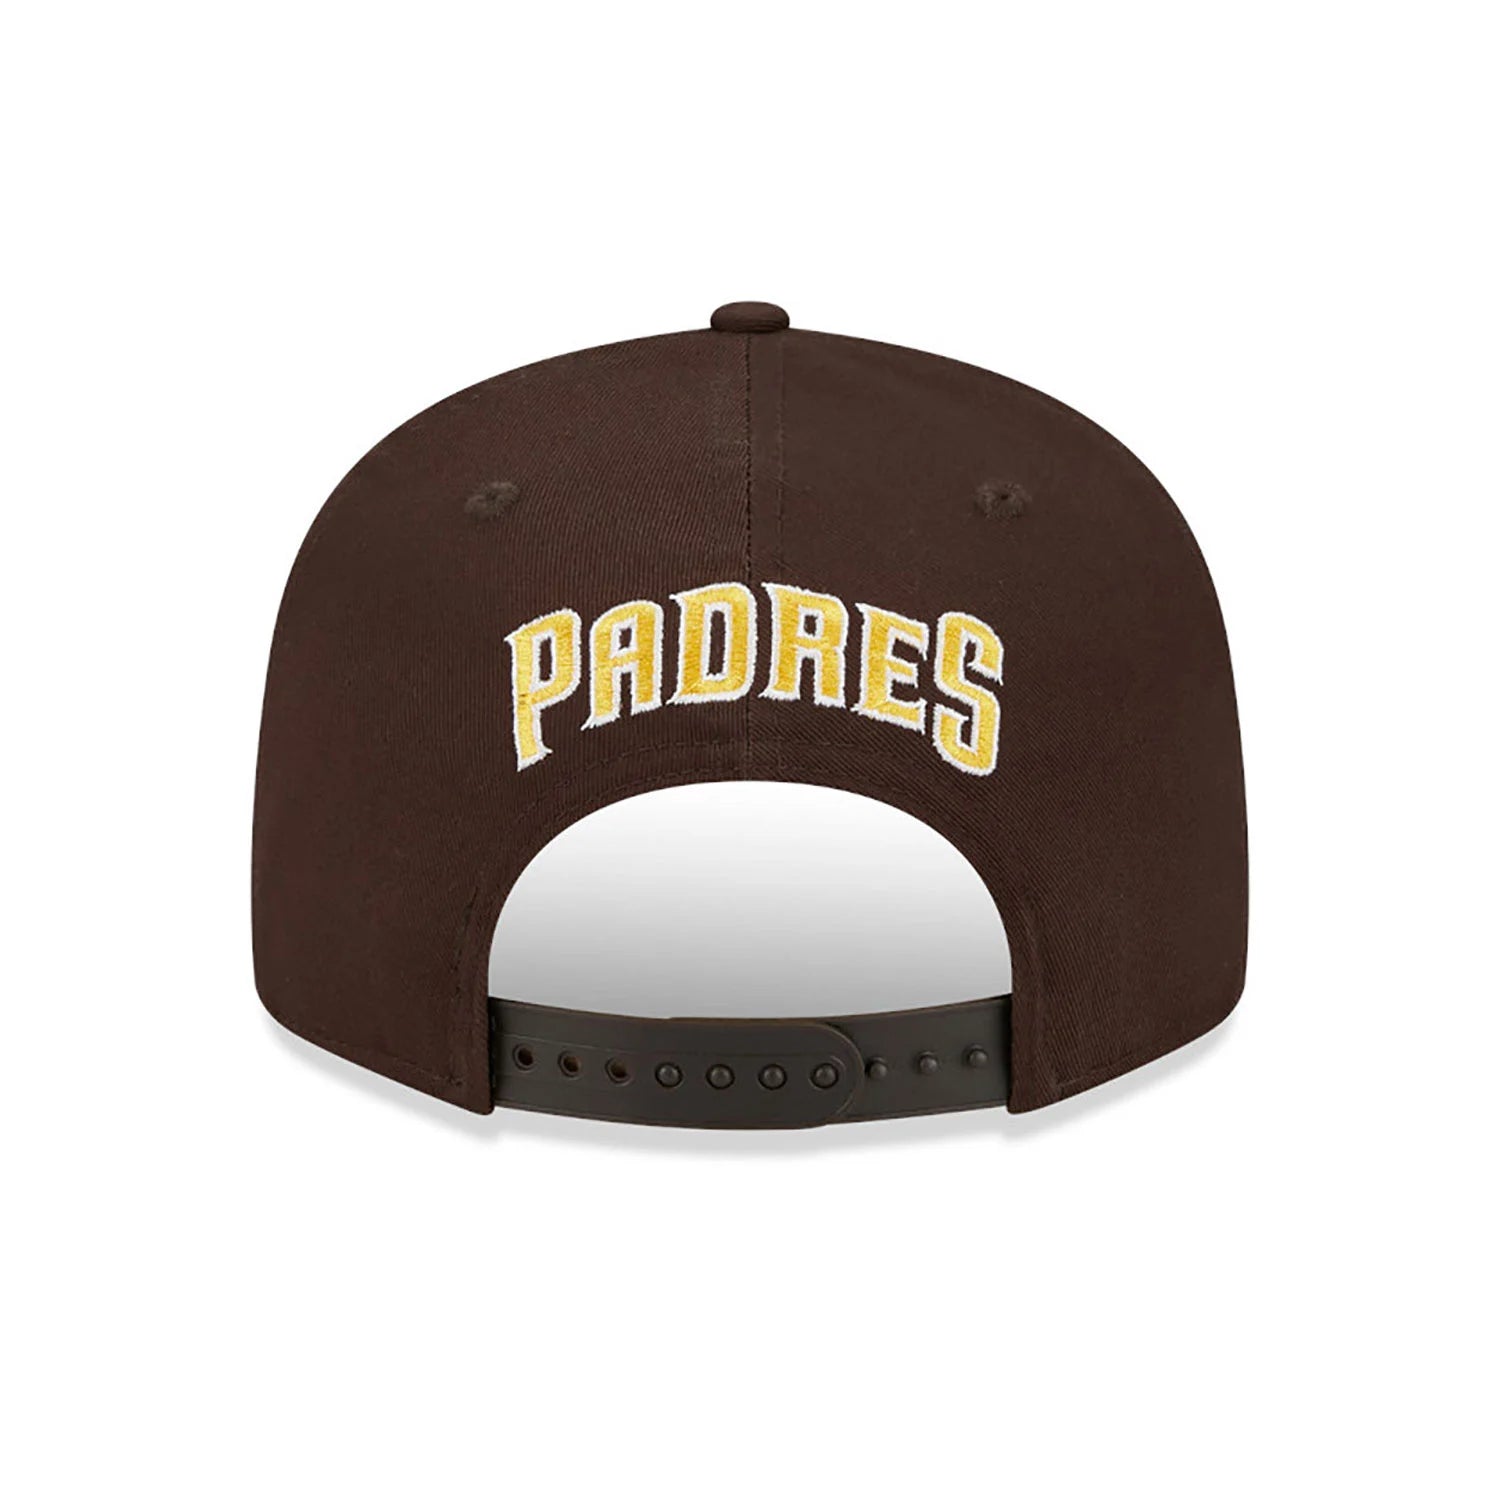 NEW ERA 9FIFTY SIDE PATCH SAN DIEGO PADRES 50TH ANNIVERSARY BROWN / LIGHT BROWN UV SNAPBACK CAP